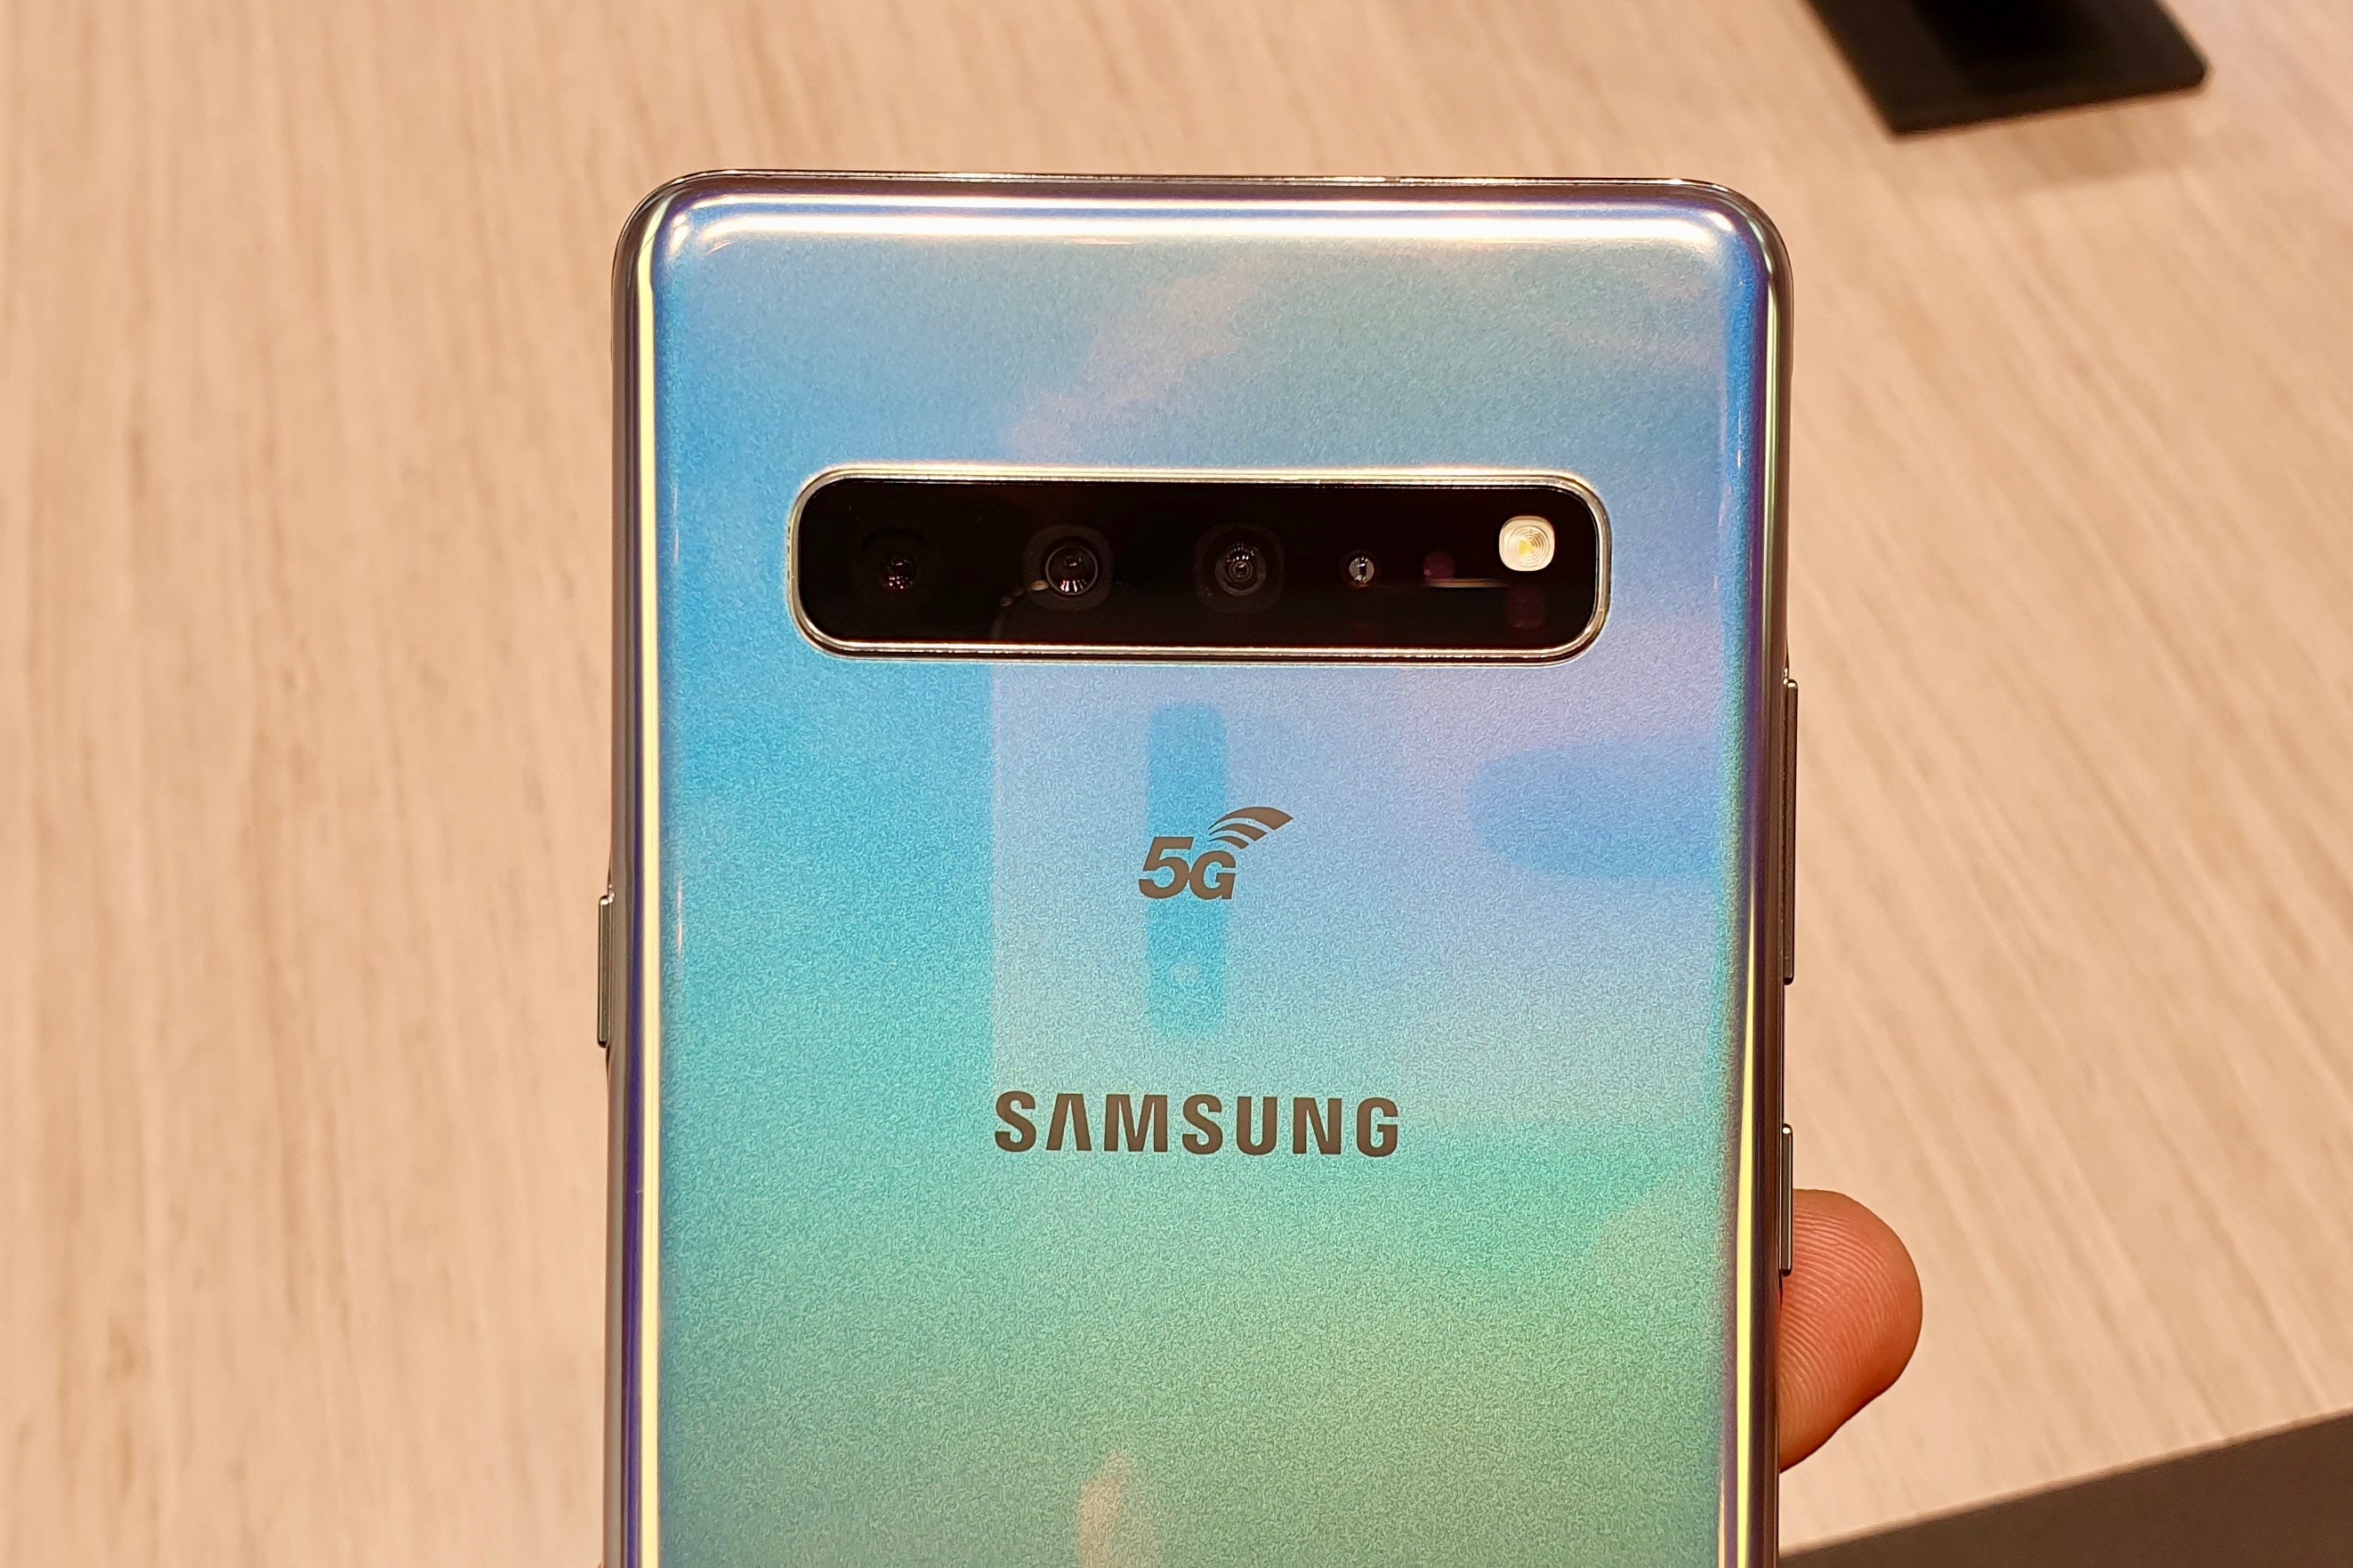 Samsung Galaxy S10 5G Review: Hands on | Trusted Reviews